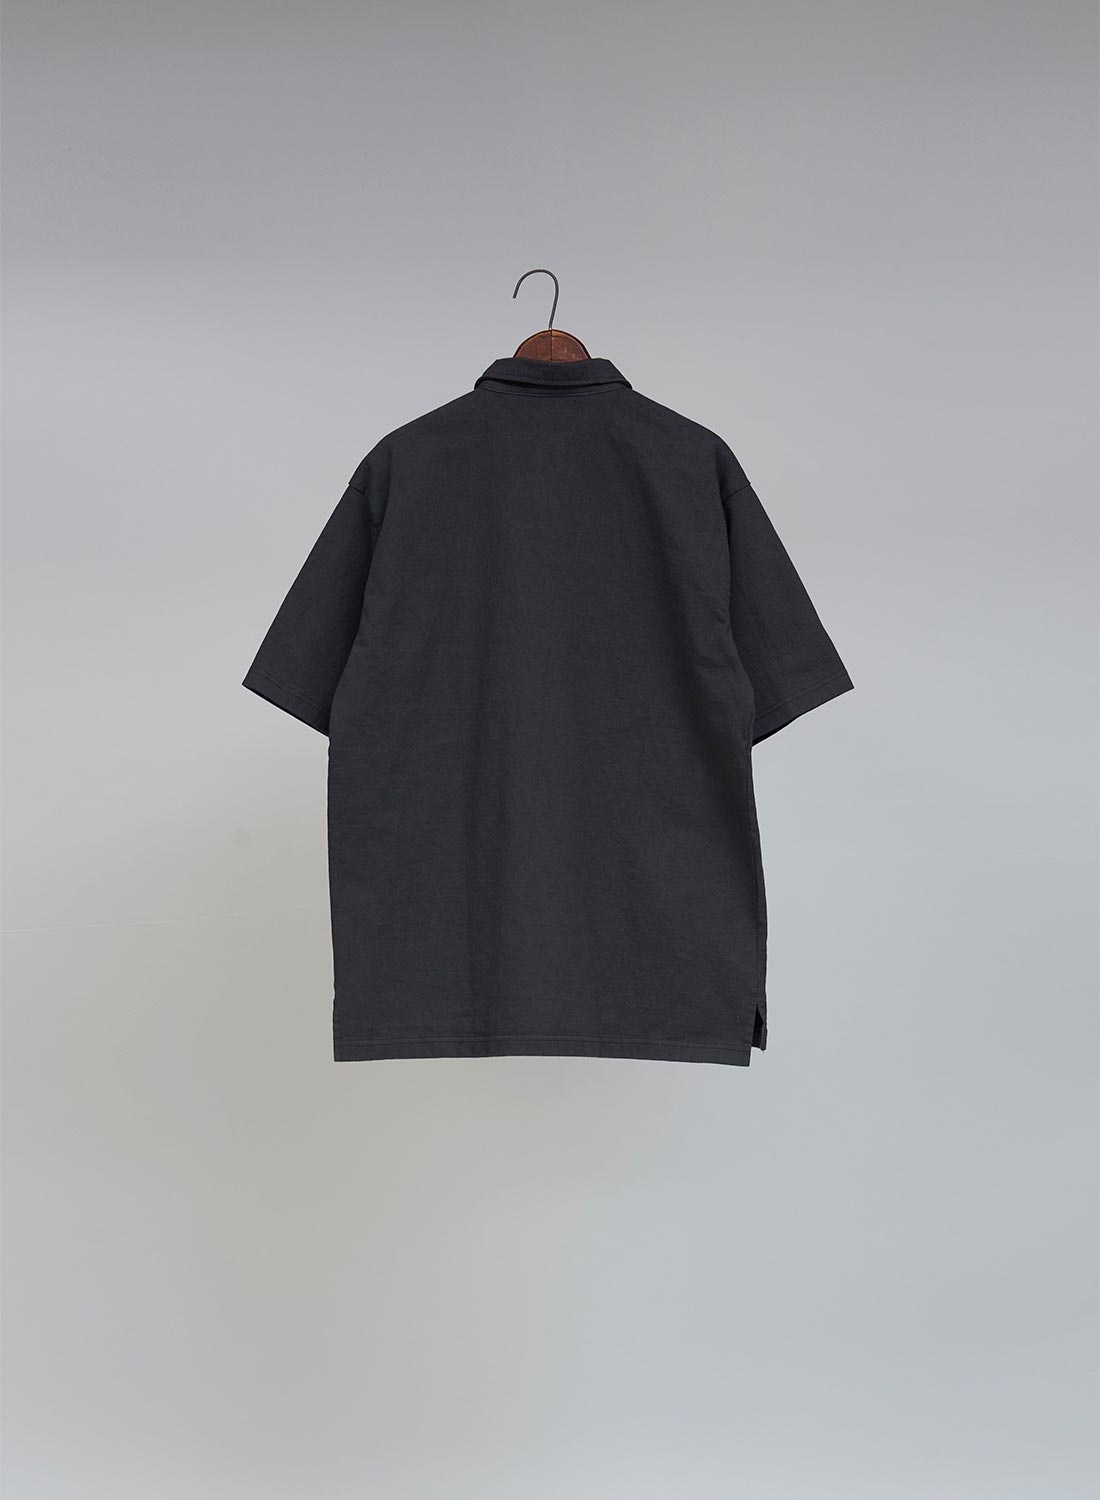 Rugger Shirt New Zealand Type in Charcoal Grey - 2